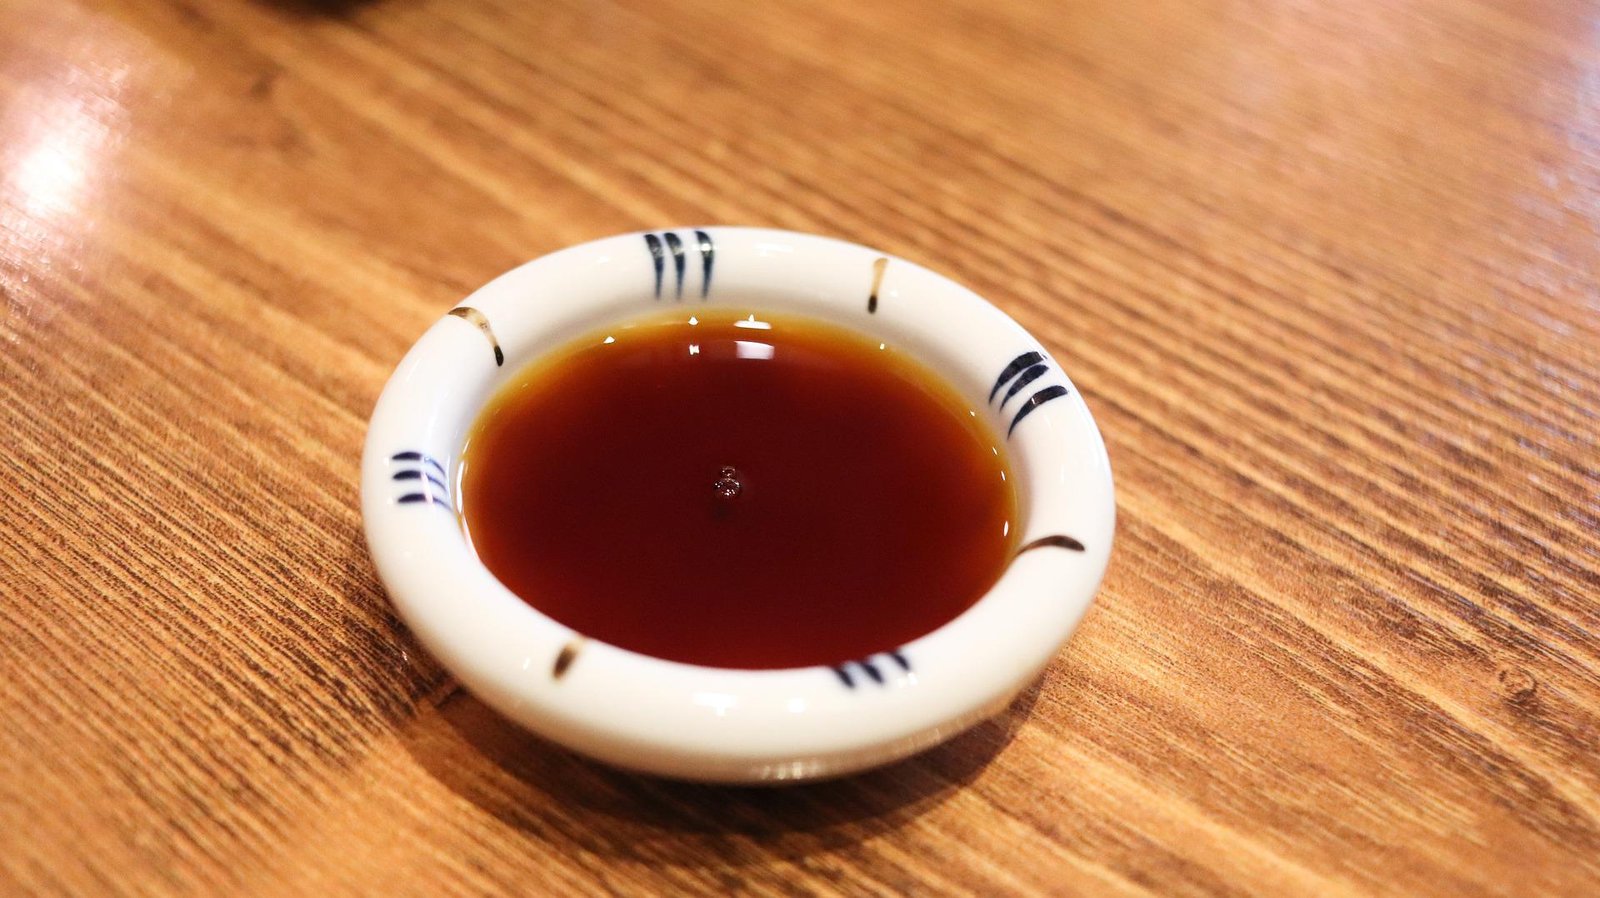 soy sauce stain